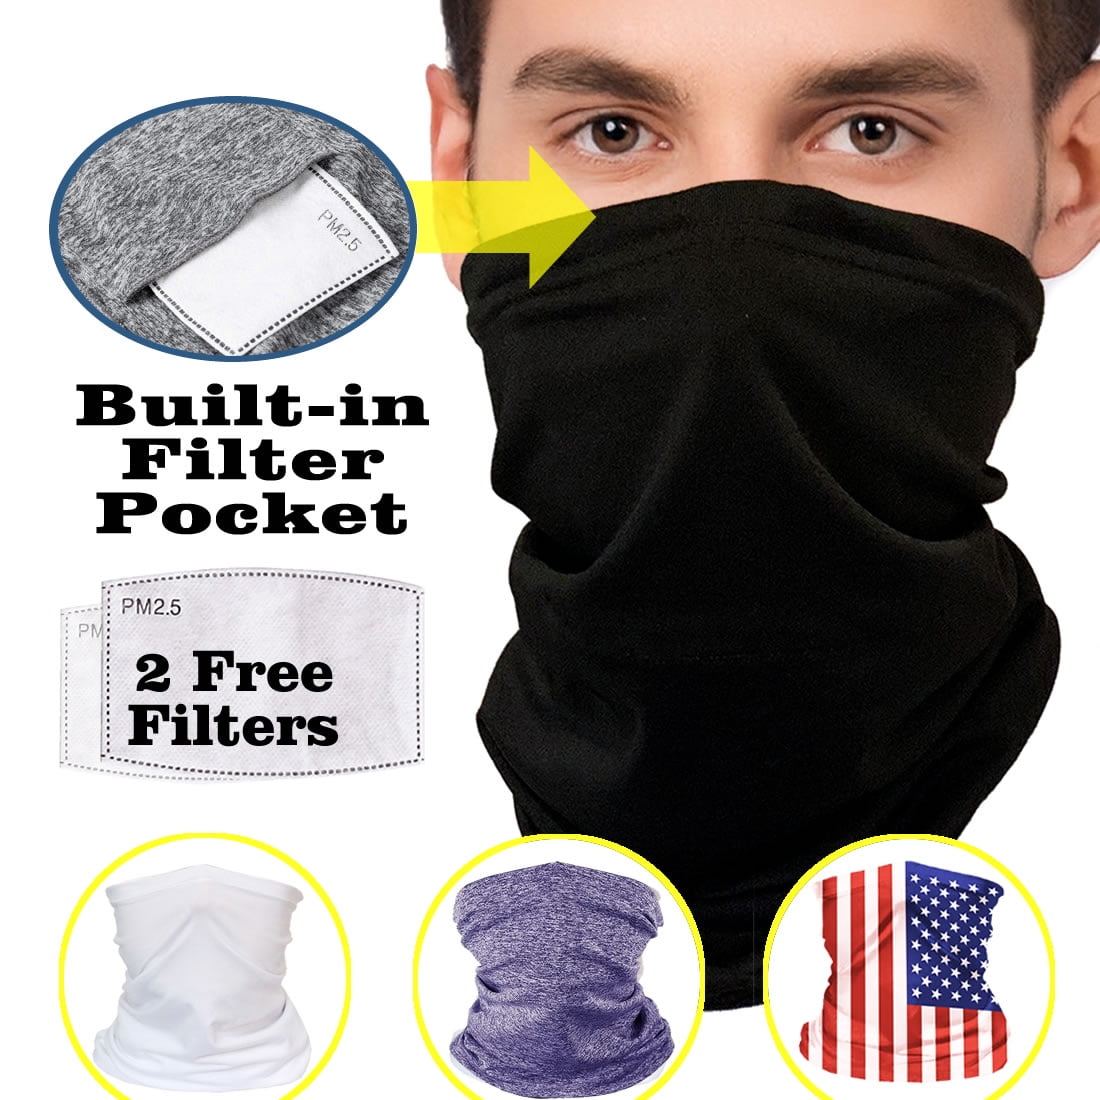 2in1 Headband & Face Mask Stay Dry and Protected from Dust Aerosoles & Elements Performance Sweatband 